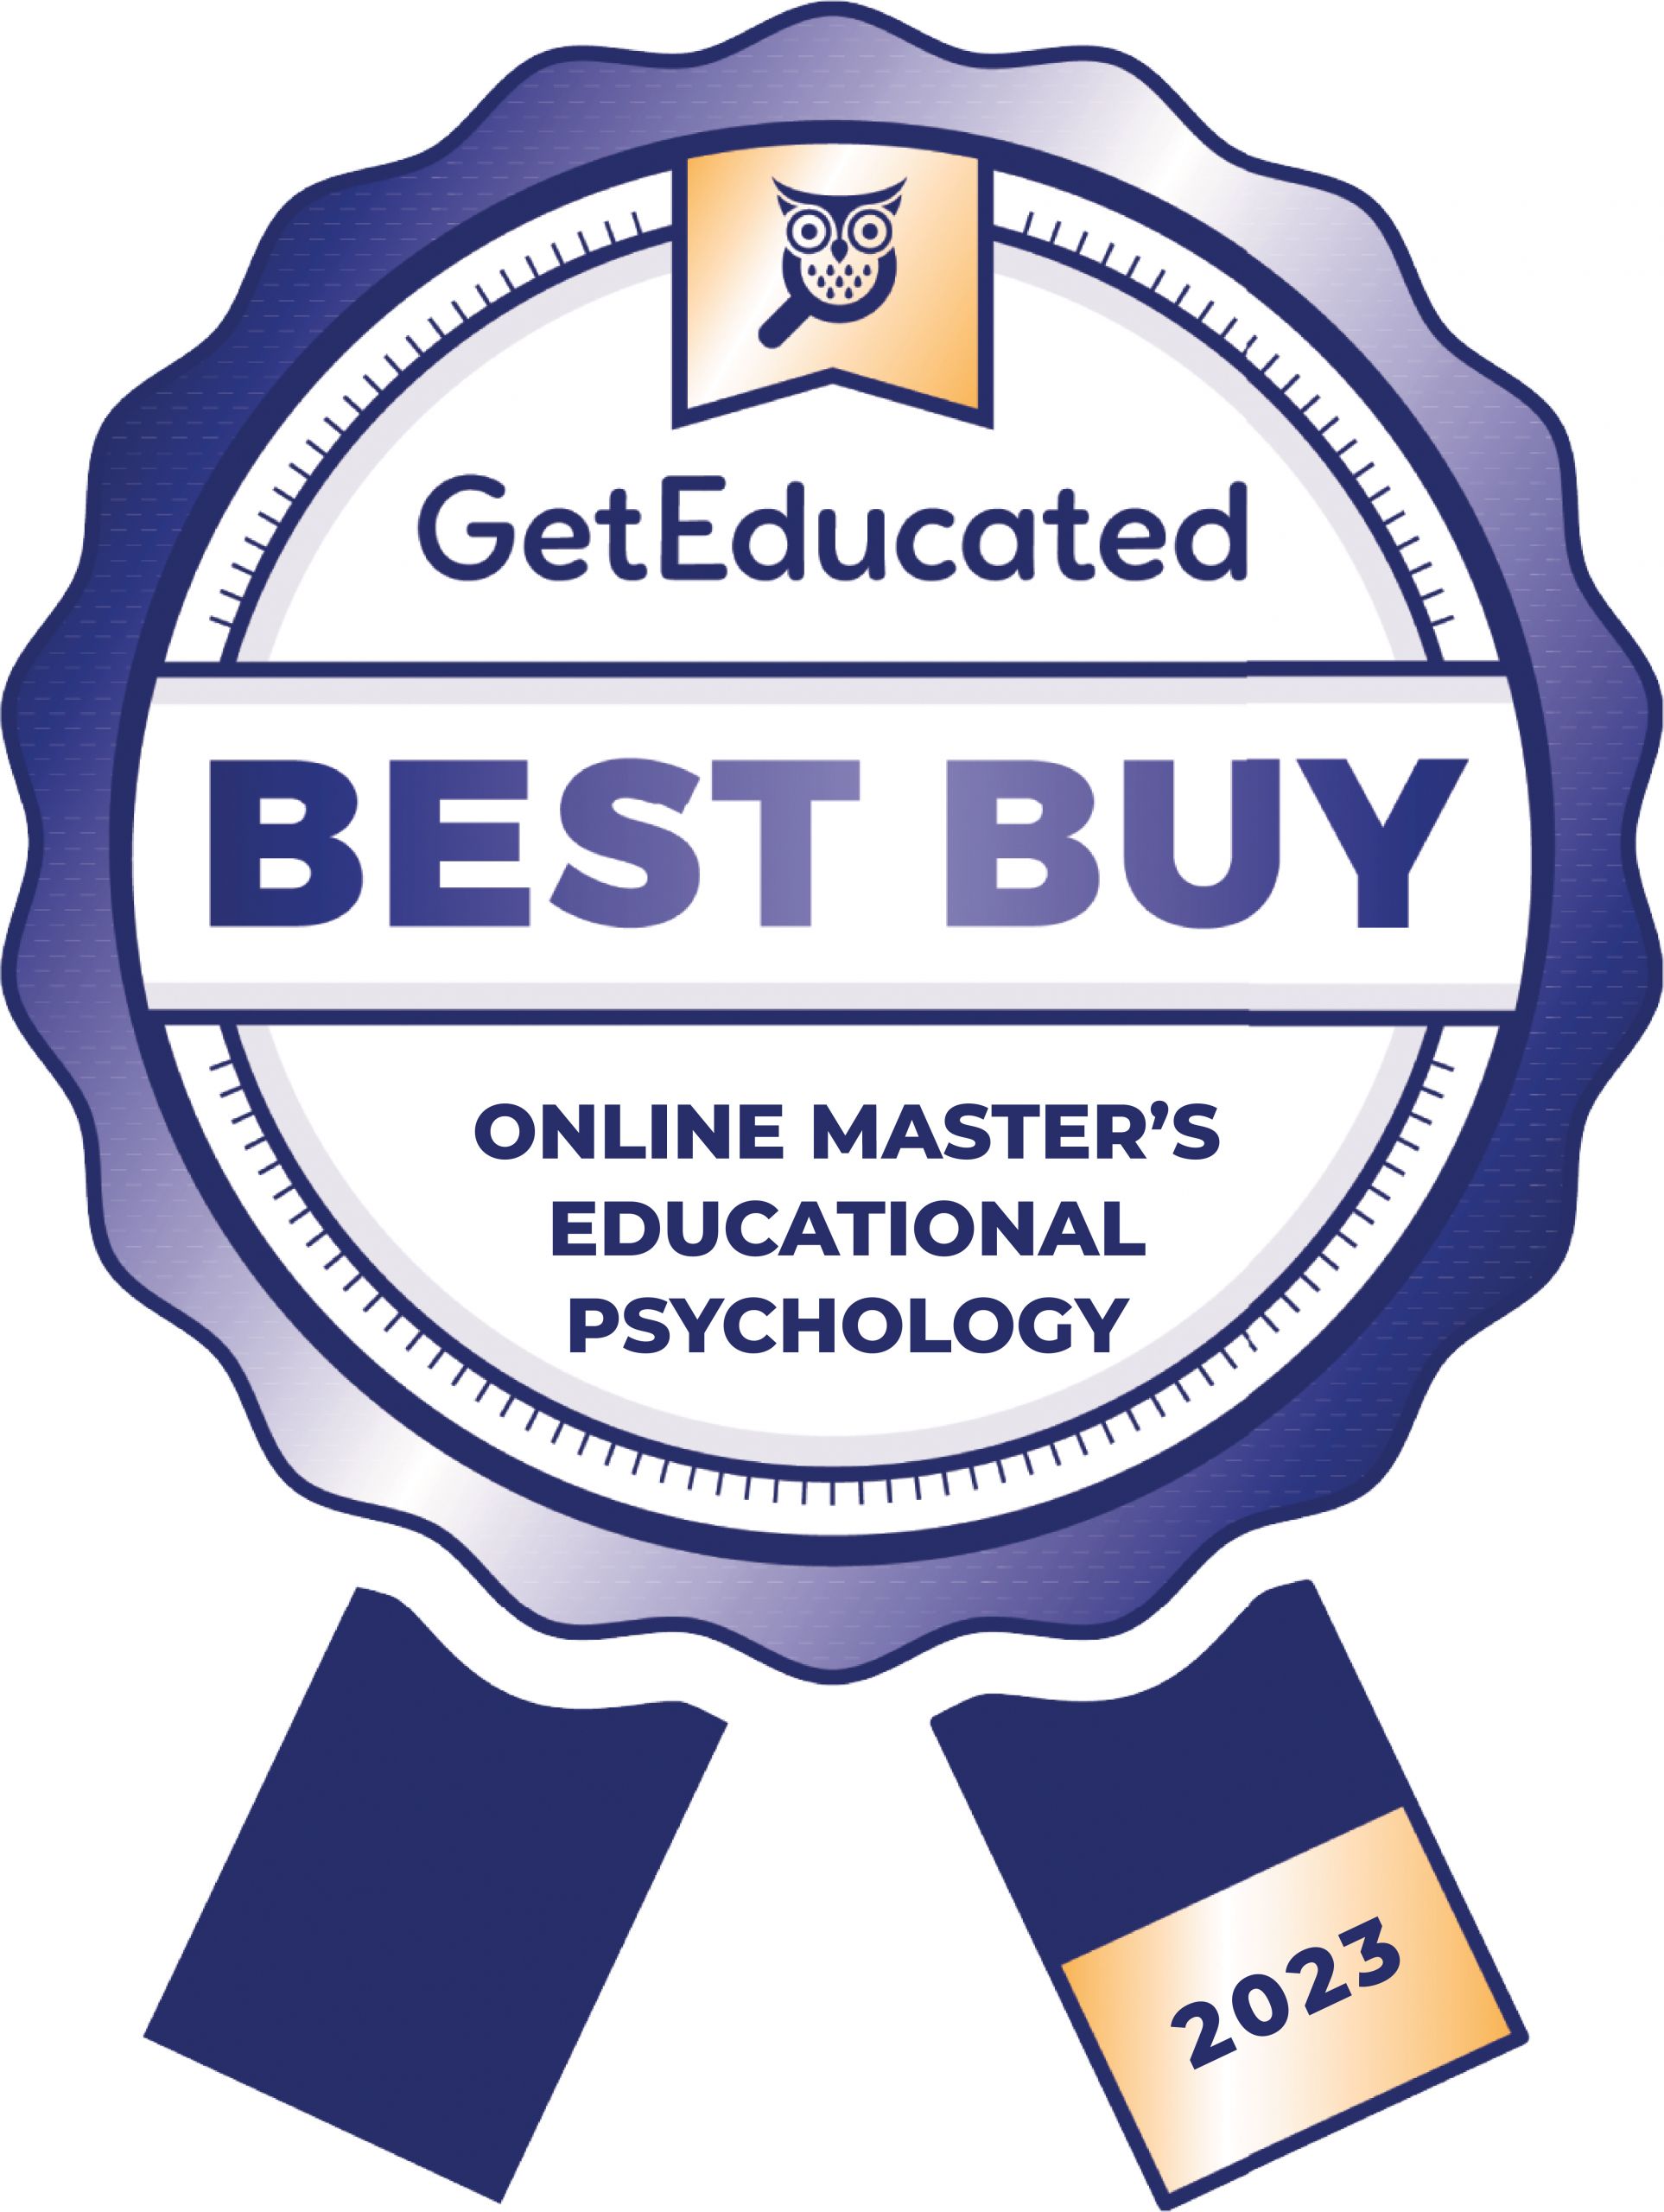 Rankings for the most affordable online master's in educational psychology